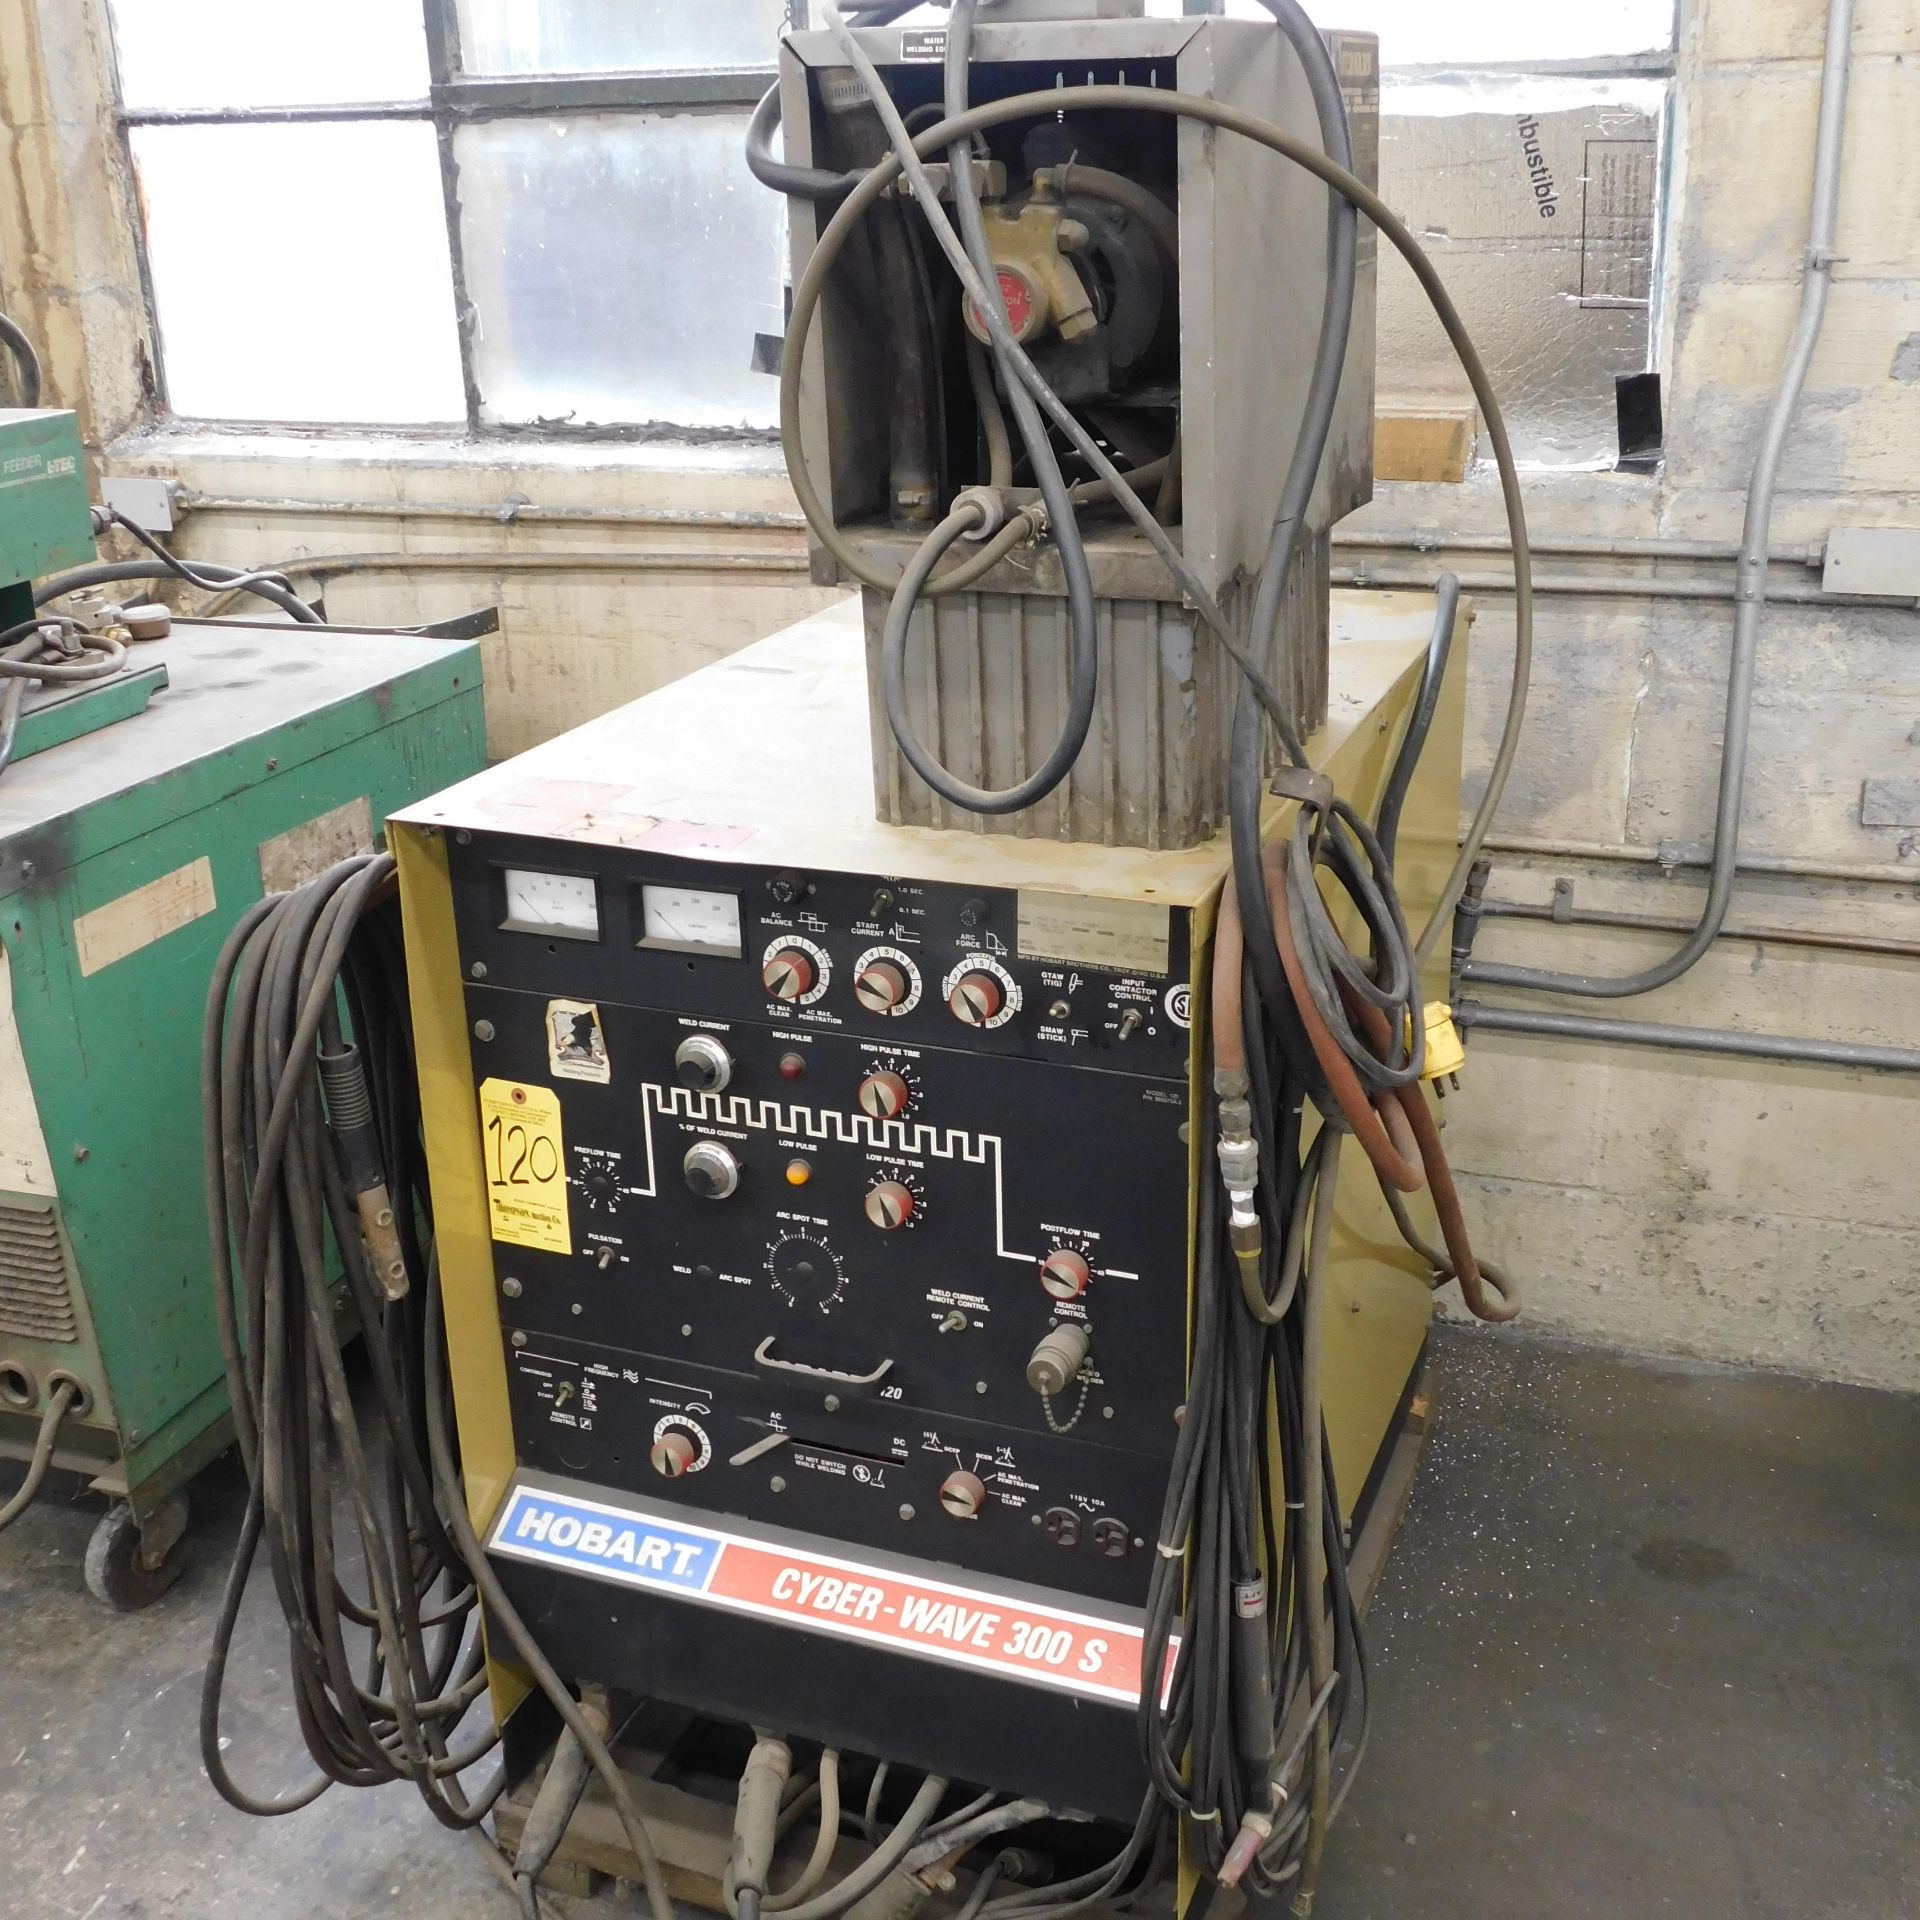 Hobart Cyber Tig Wave 300S Tig Welder, s/n 86WS09551, with Bernard Chiller and Leads